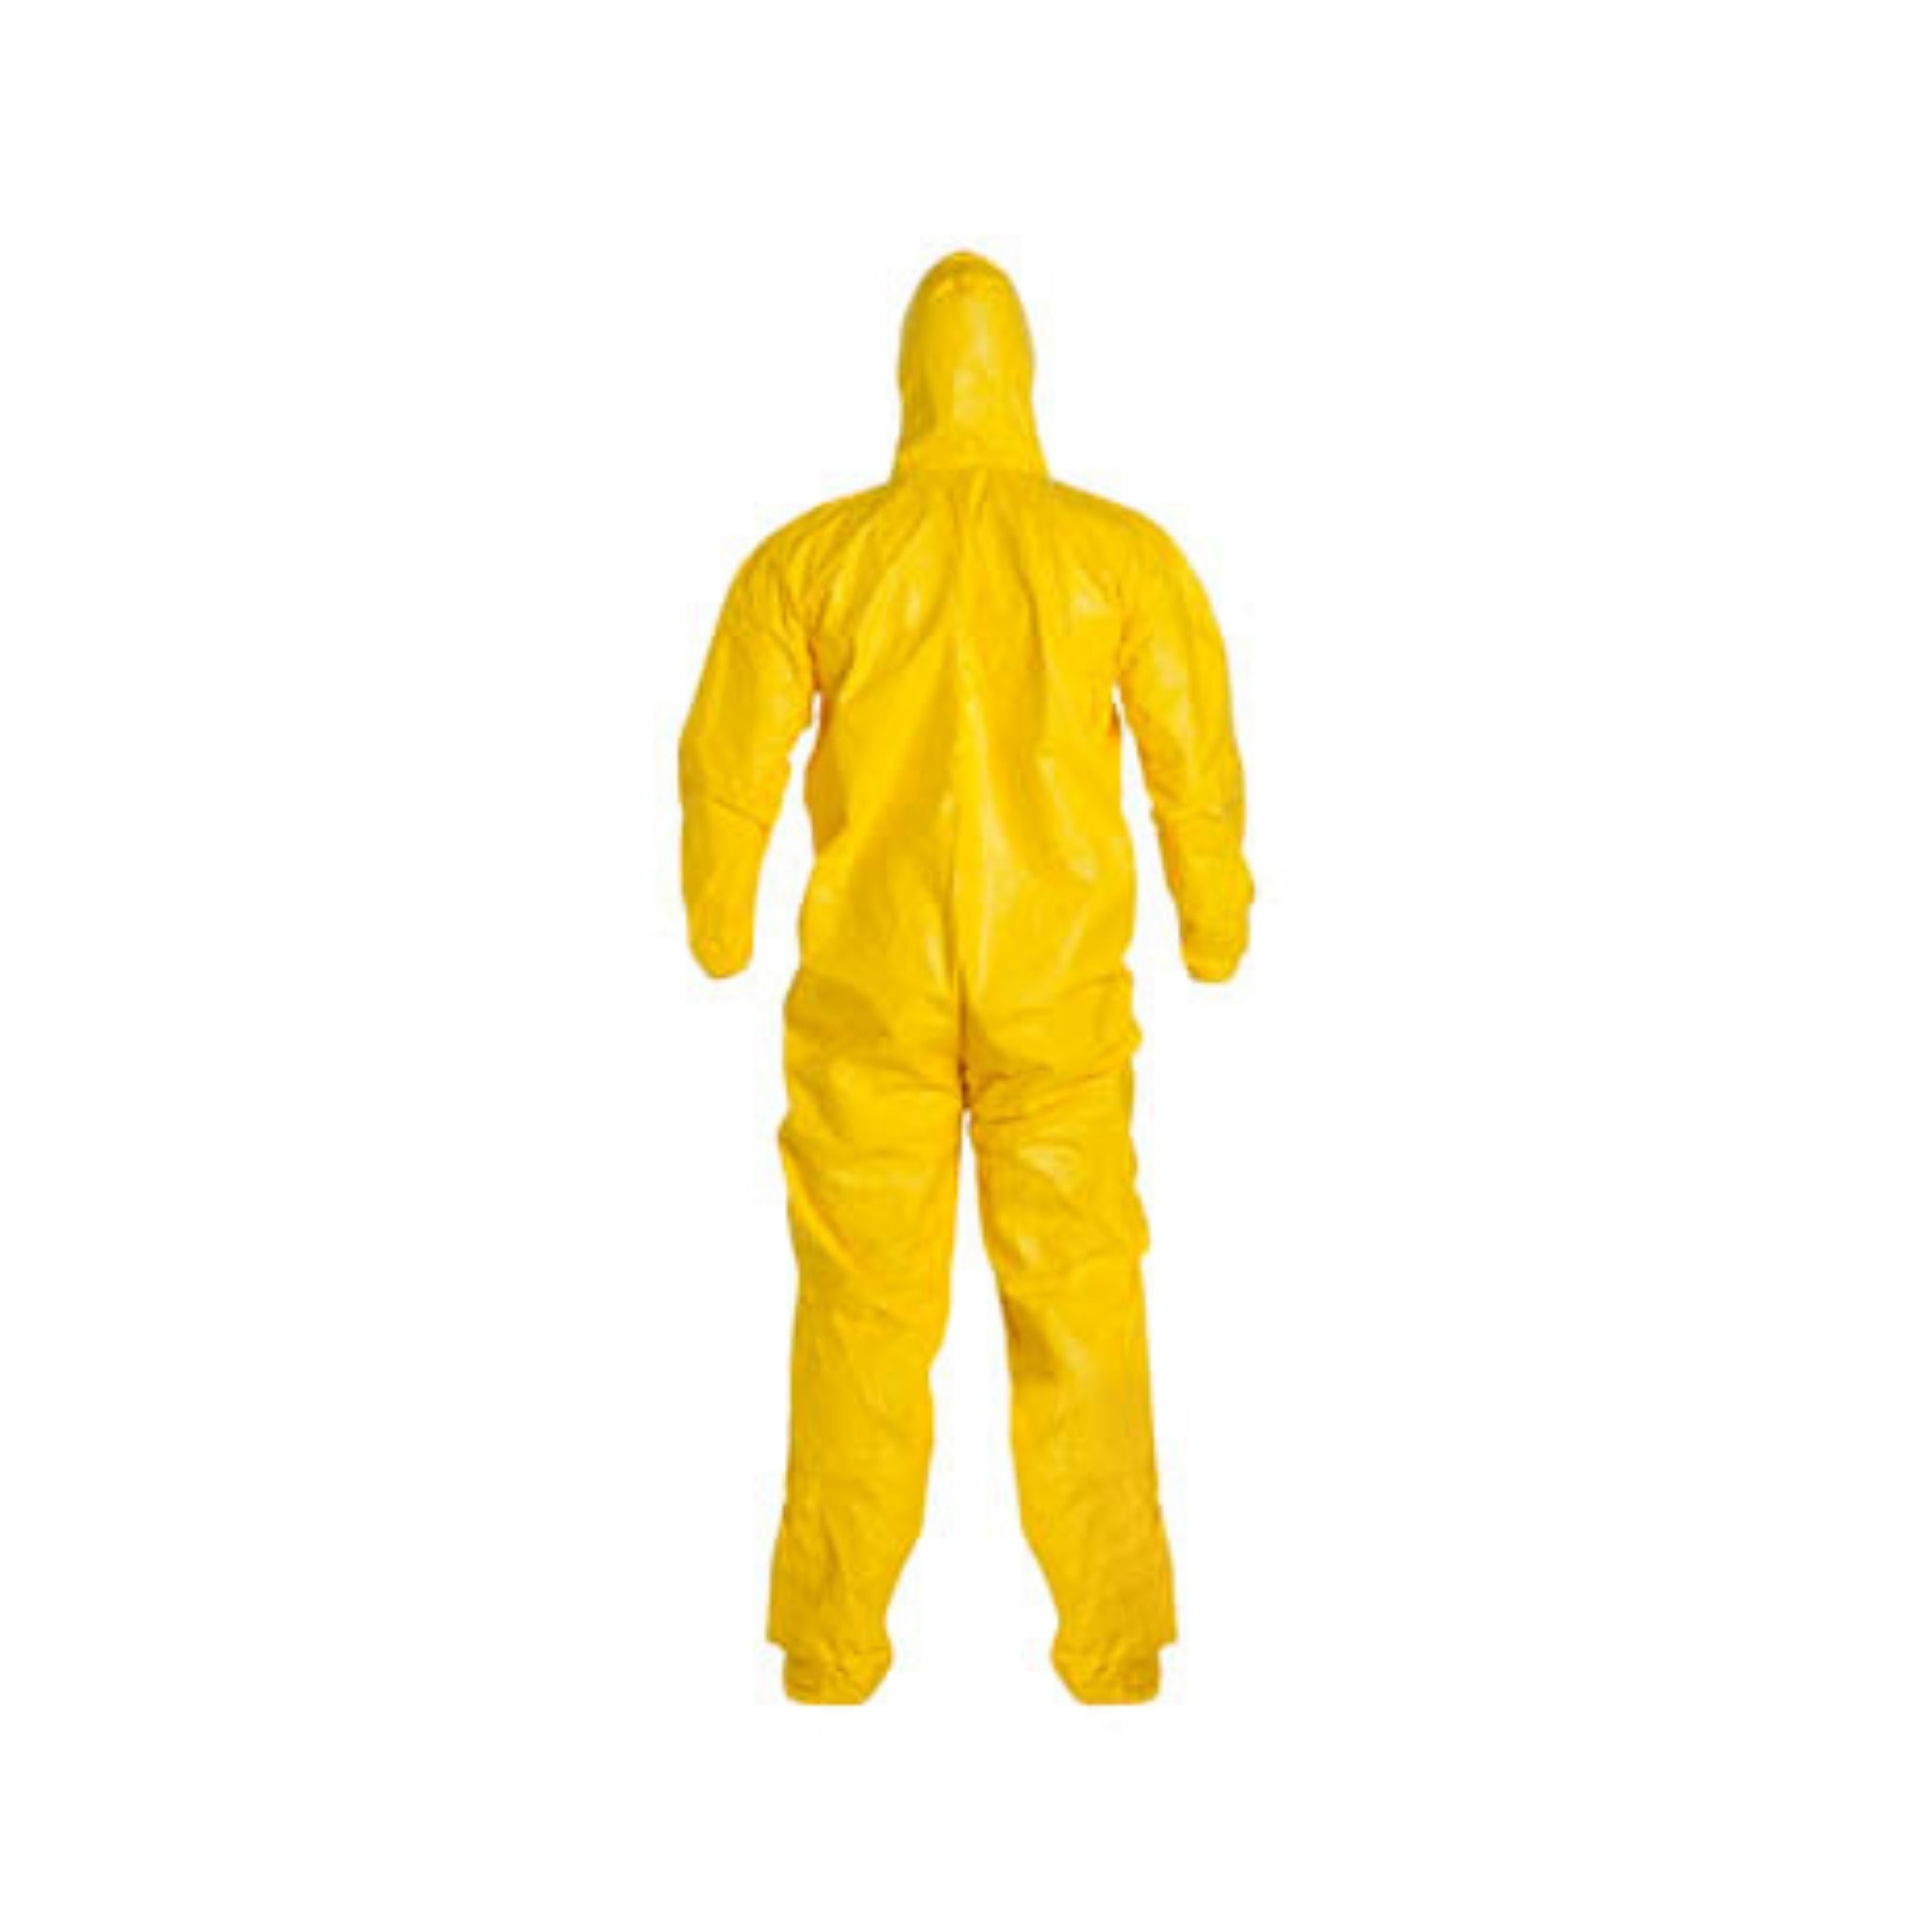 DuPont QC122S - Pack of 1: Tychem 2000 Standard Fit Hood, Booties Stormflap Elastic Wrists and Ankles Serged Seam, Yellow